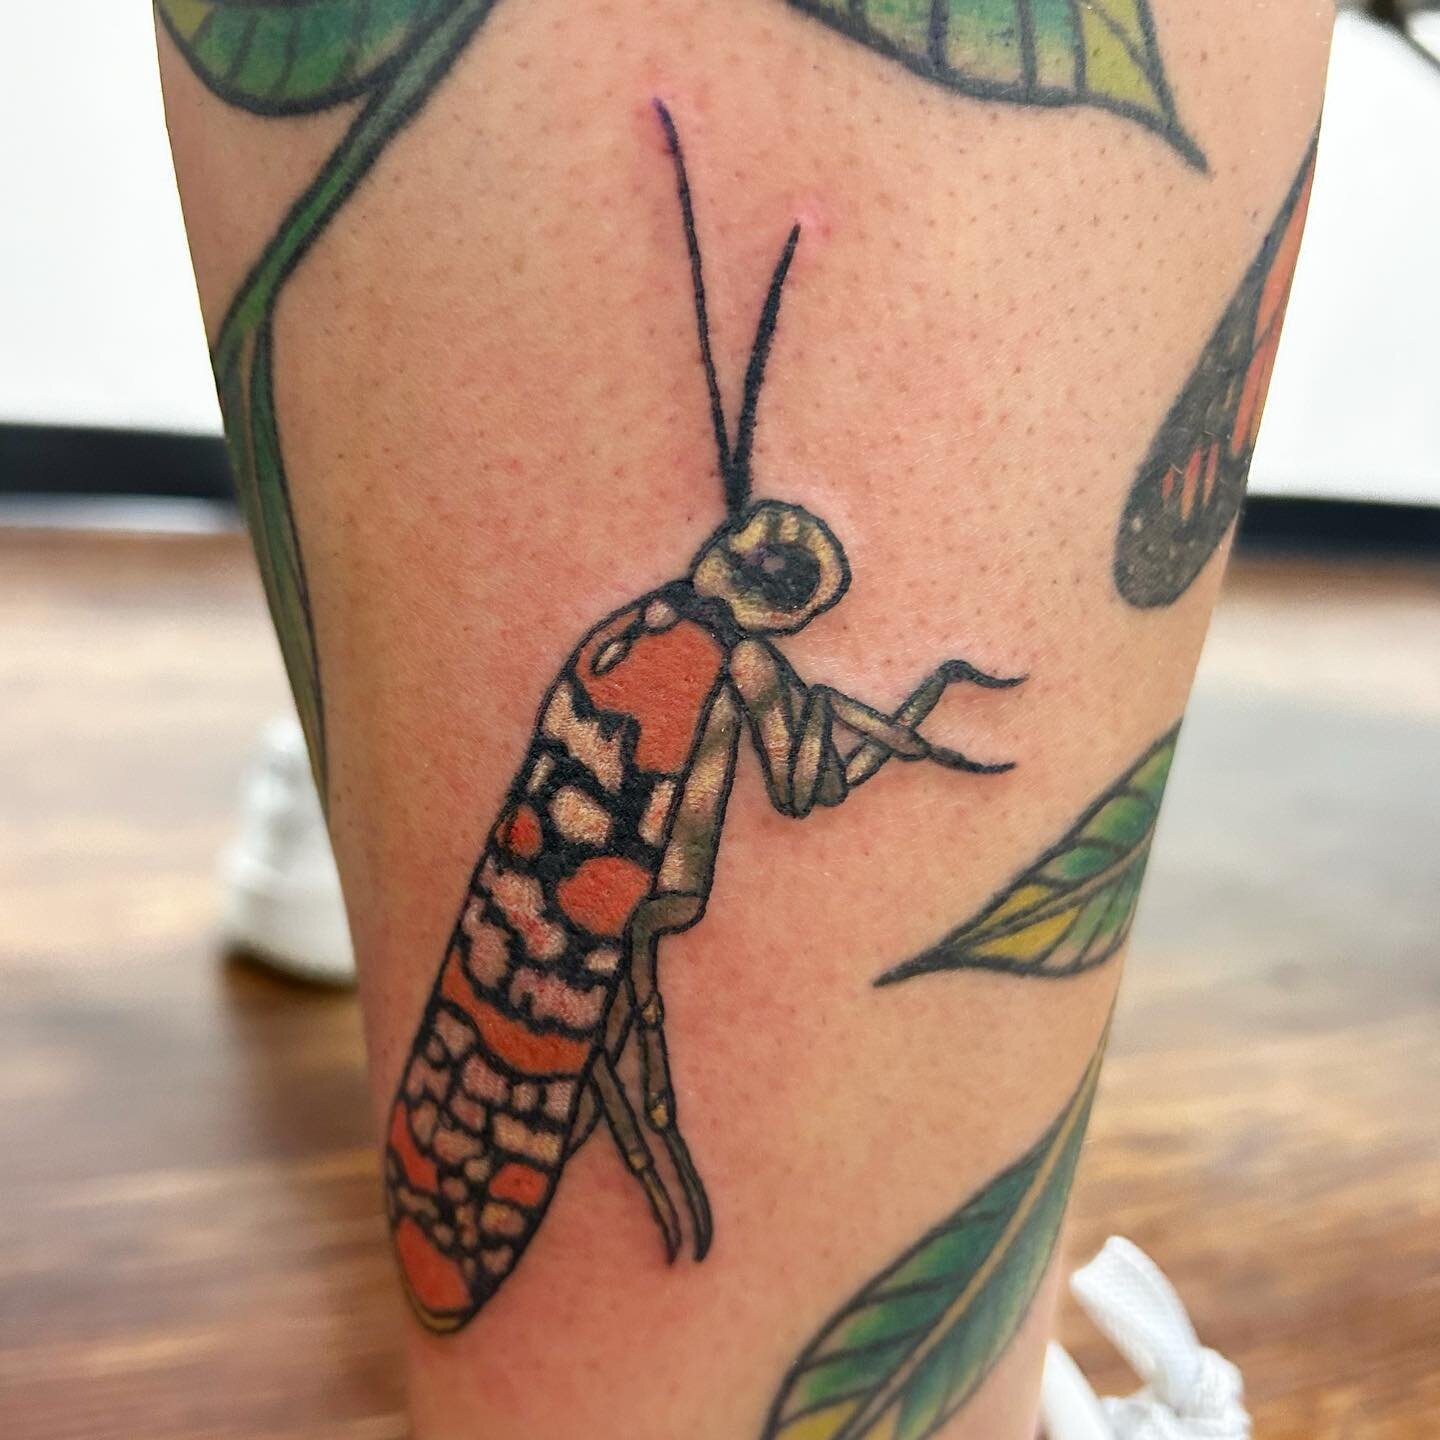 Some more cool bugs for @ern.in.de.sand 🫶🏻 thanks again for the best convos and never forget that pickles don&rsquo;t belong on hot sammiches. .
.
.
#girlswhotattoo #ladytattooers #njtattooartist #njtattooshop #atlanticcounty #skinarttraditional #t